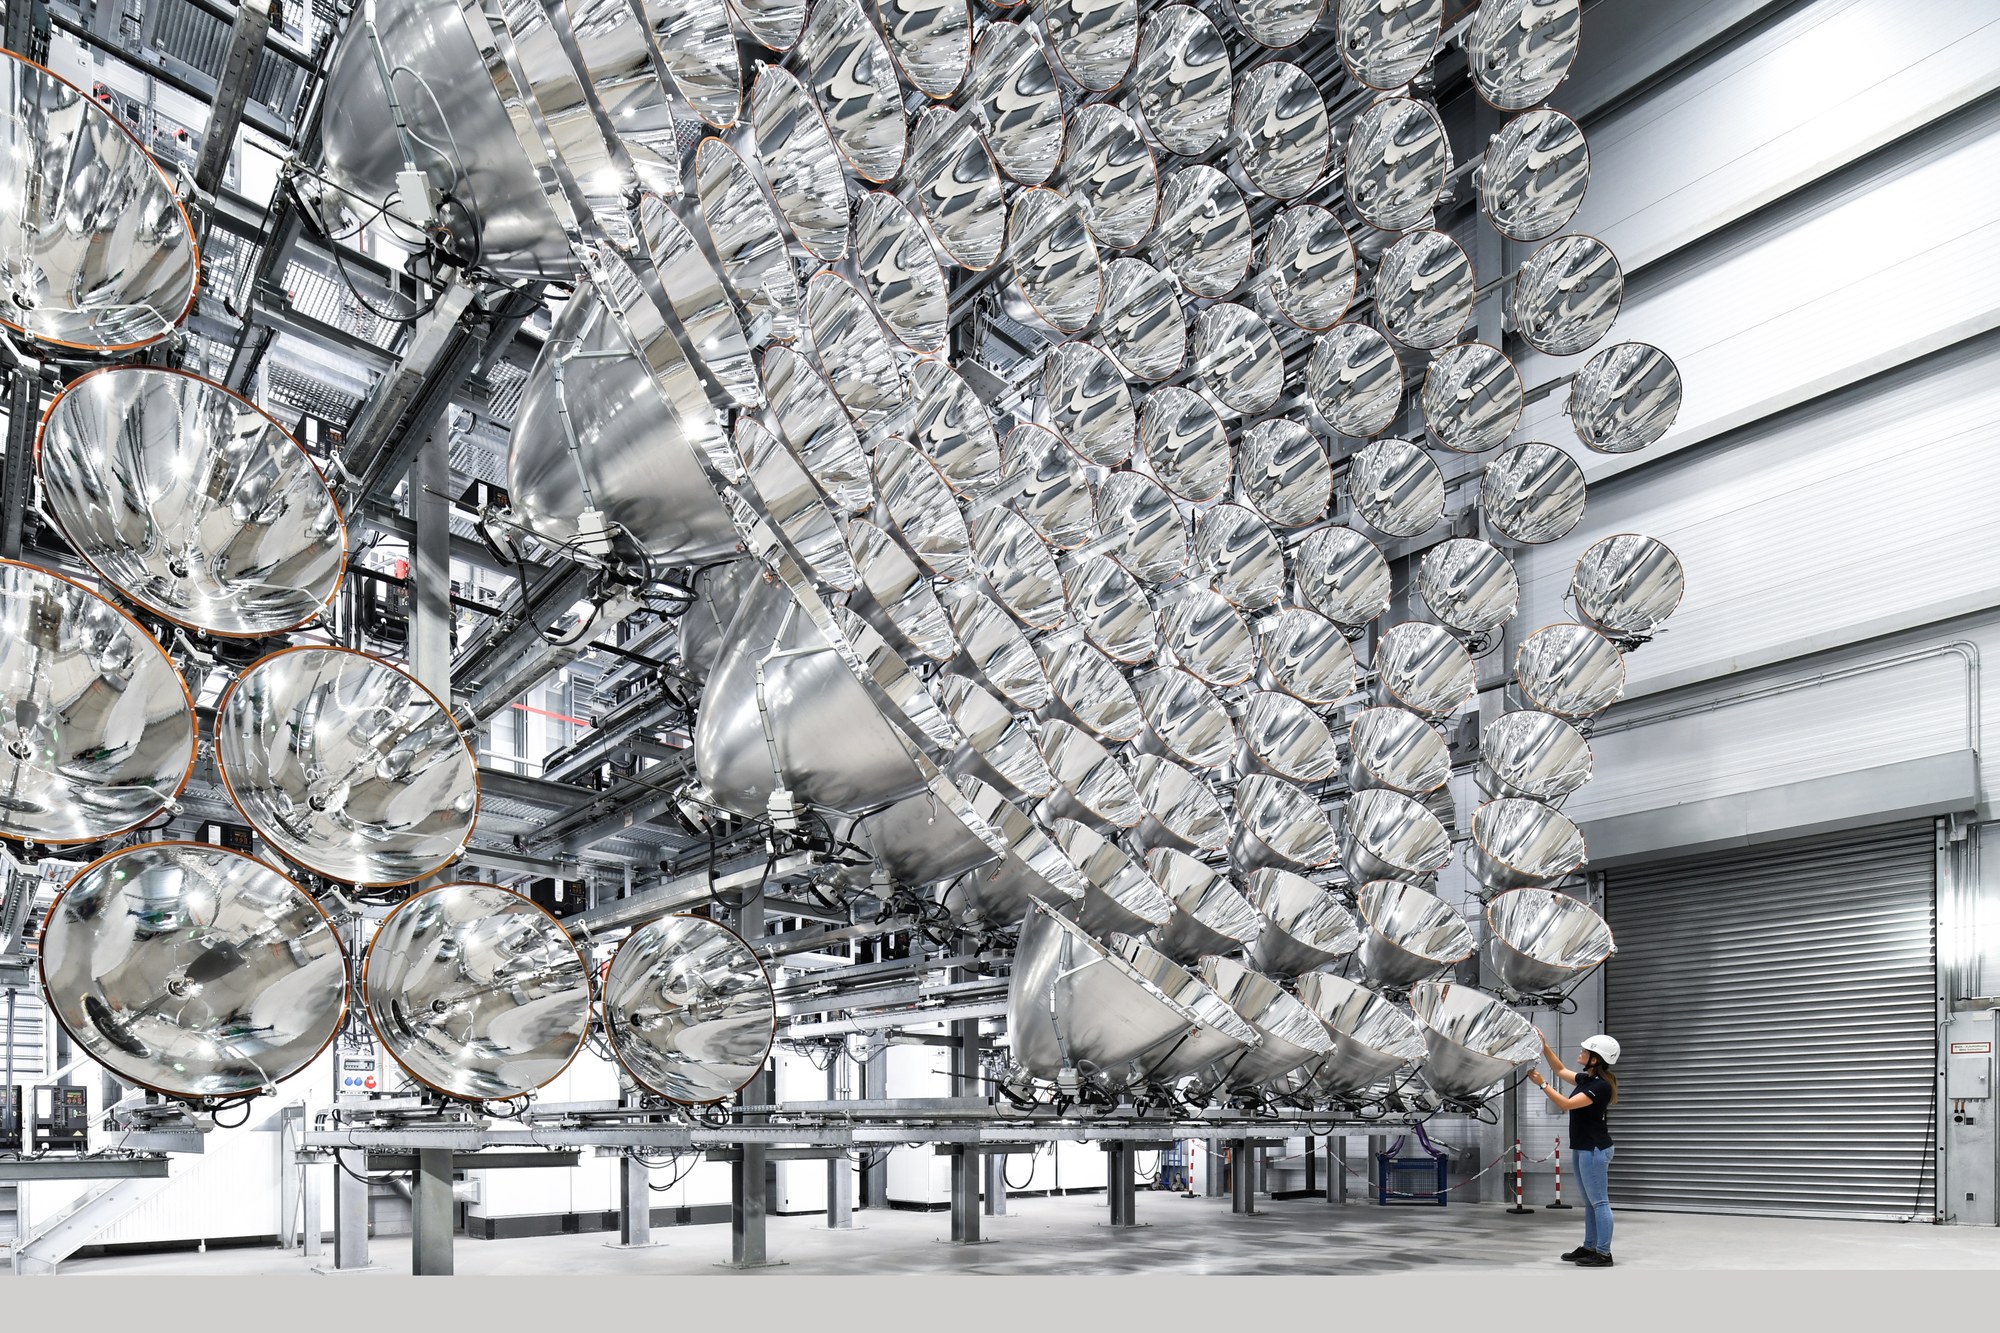 A researcher stands in front of the wall of 149 high-power radiators in Synlight.